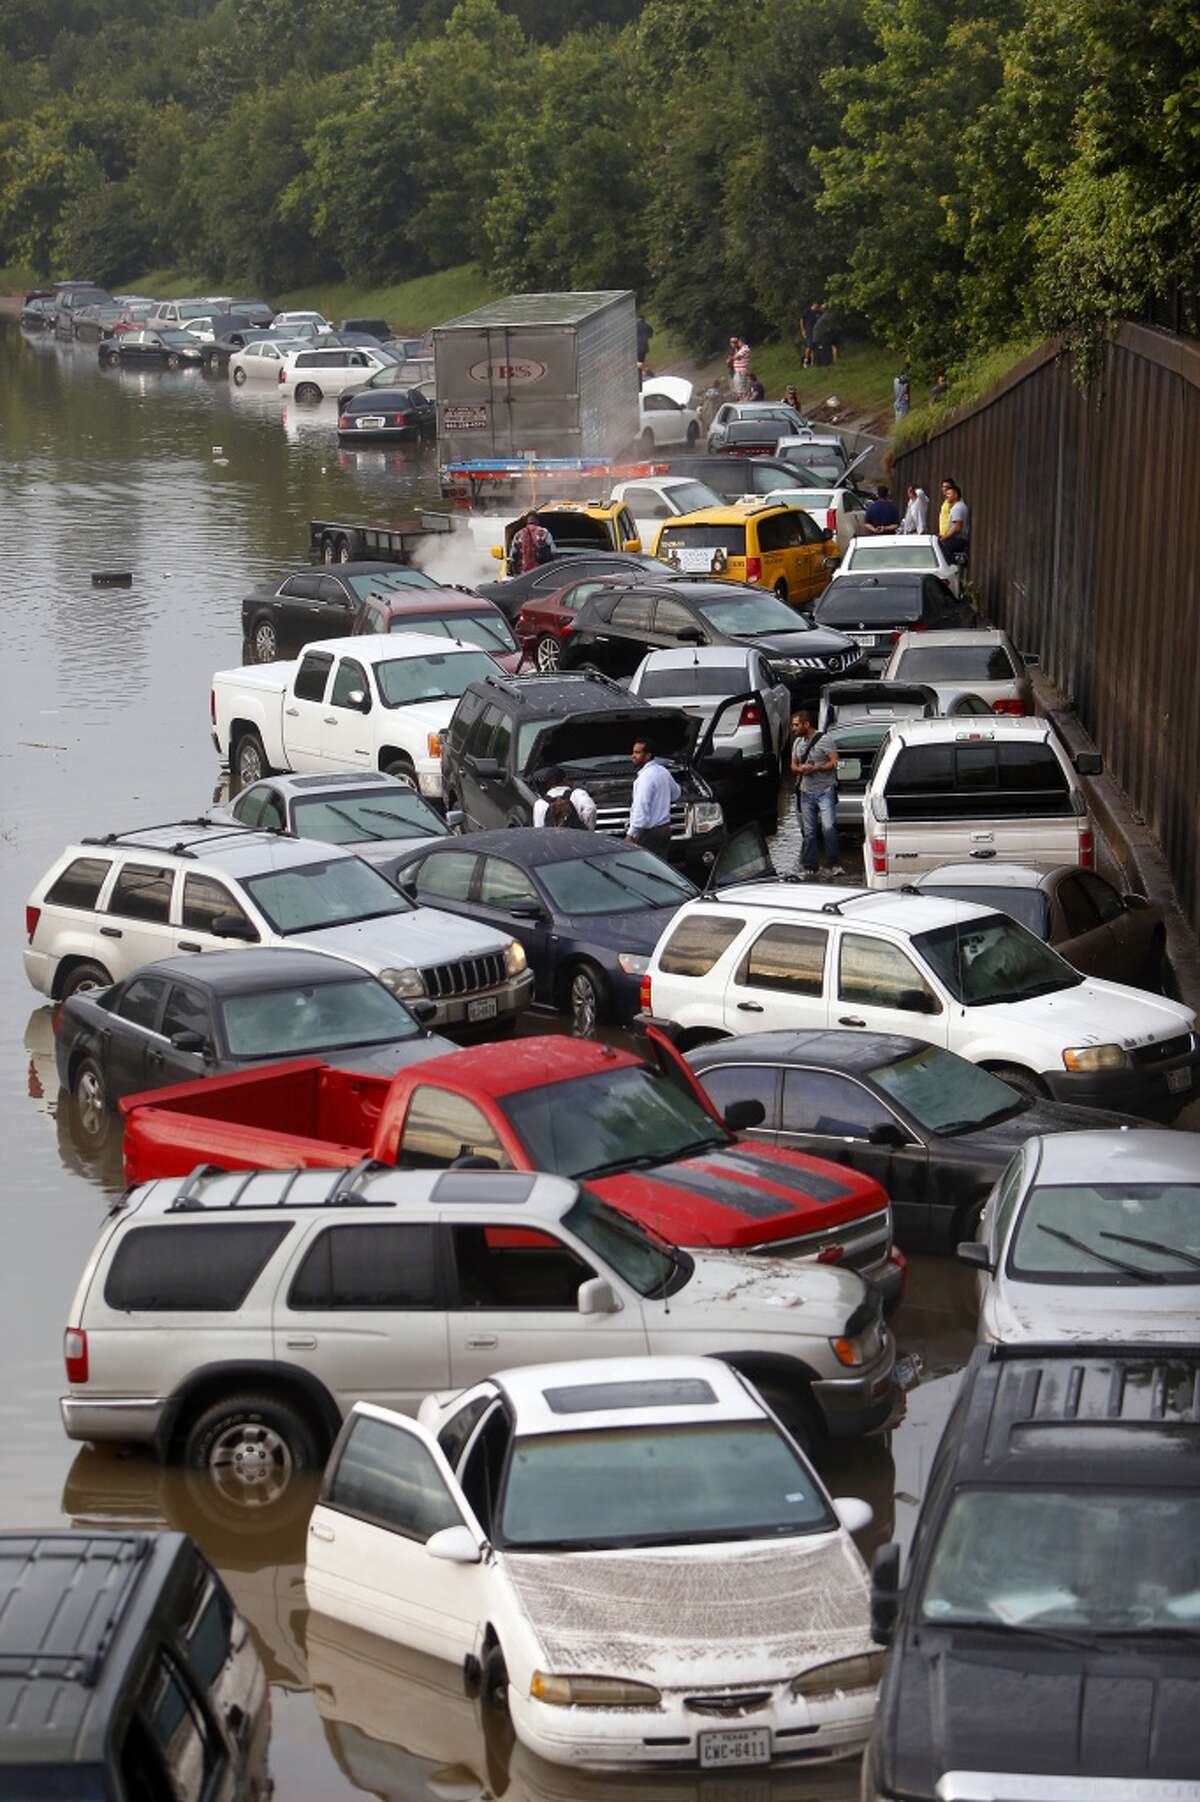 Motorists are seen stranded along I-45 near North Main after storms flooded the area, Tuesday, May 26, 2015, in Houston. (Cody Duty / Houston Chronicle)